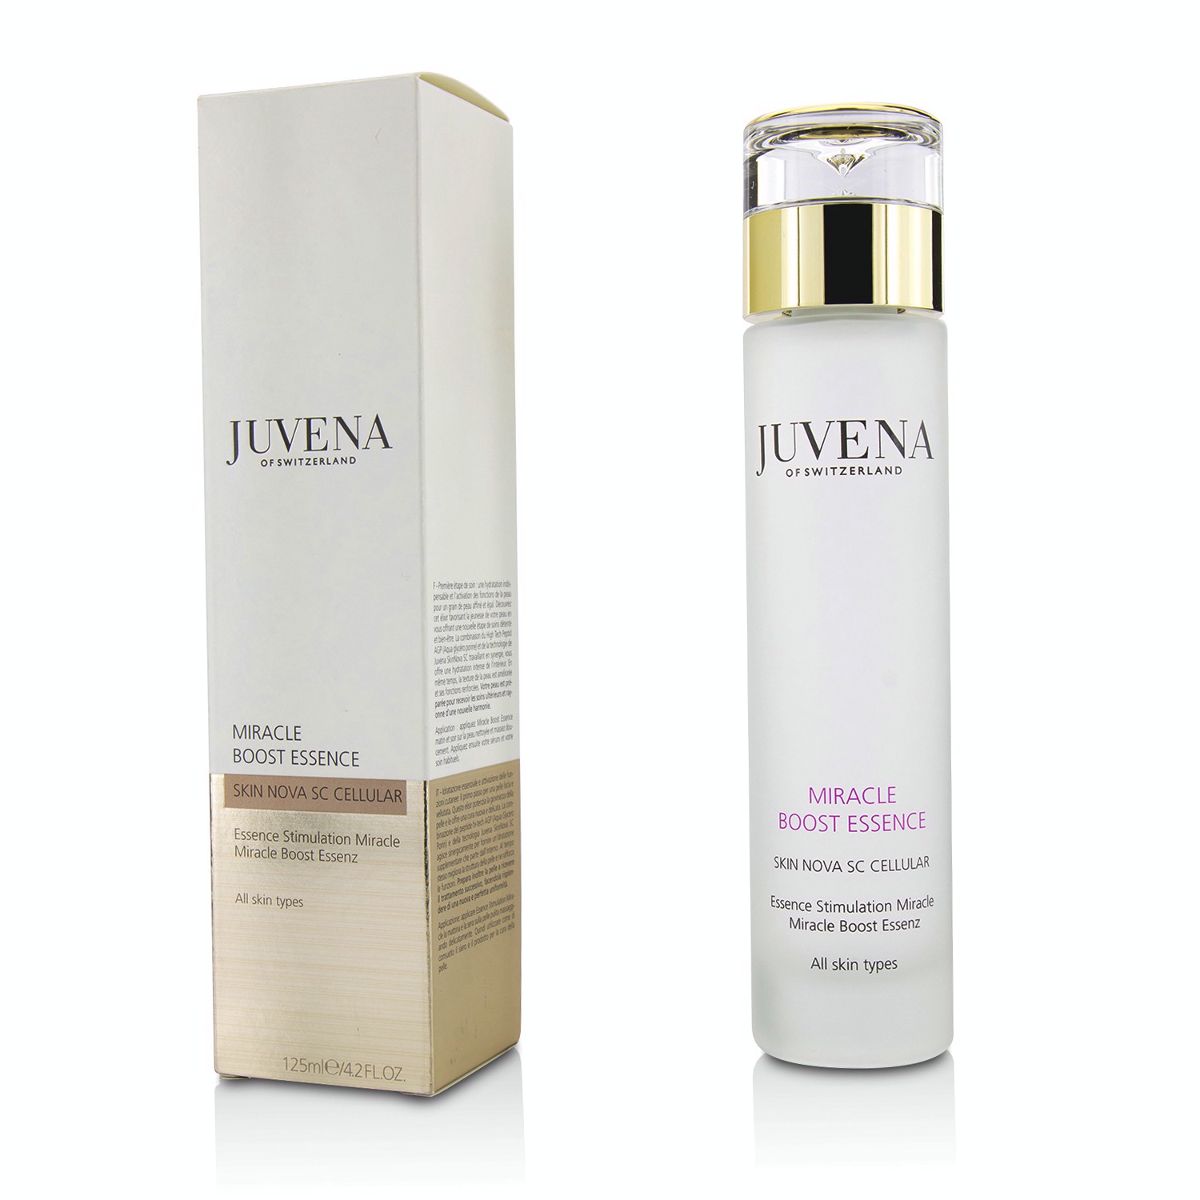 Miracle Boost Essence - All Skin Types Juvena Image